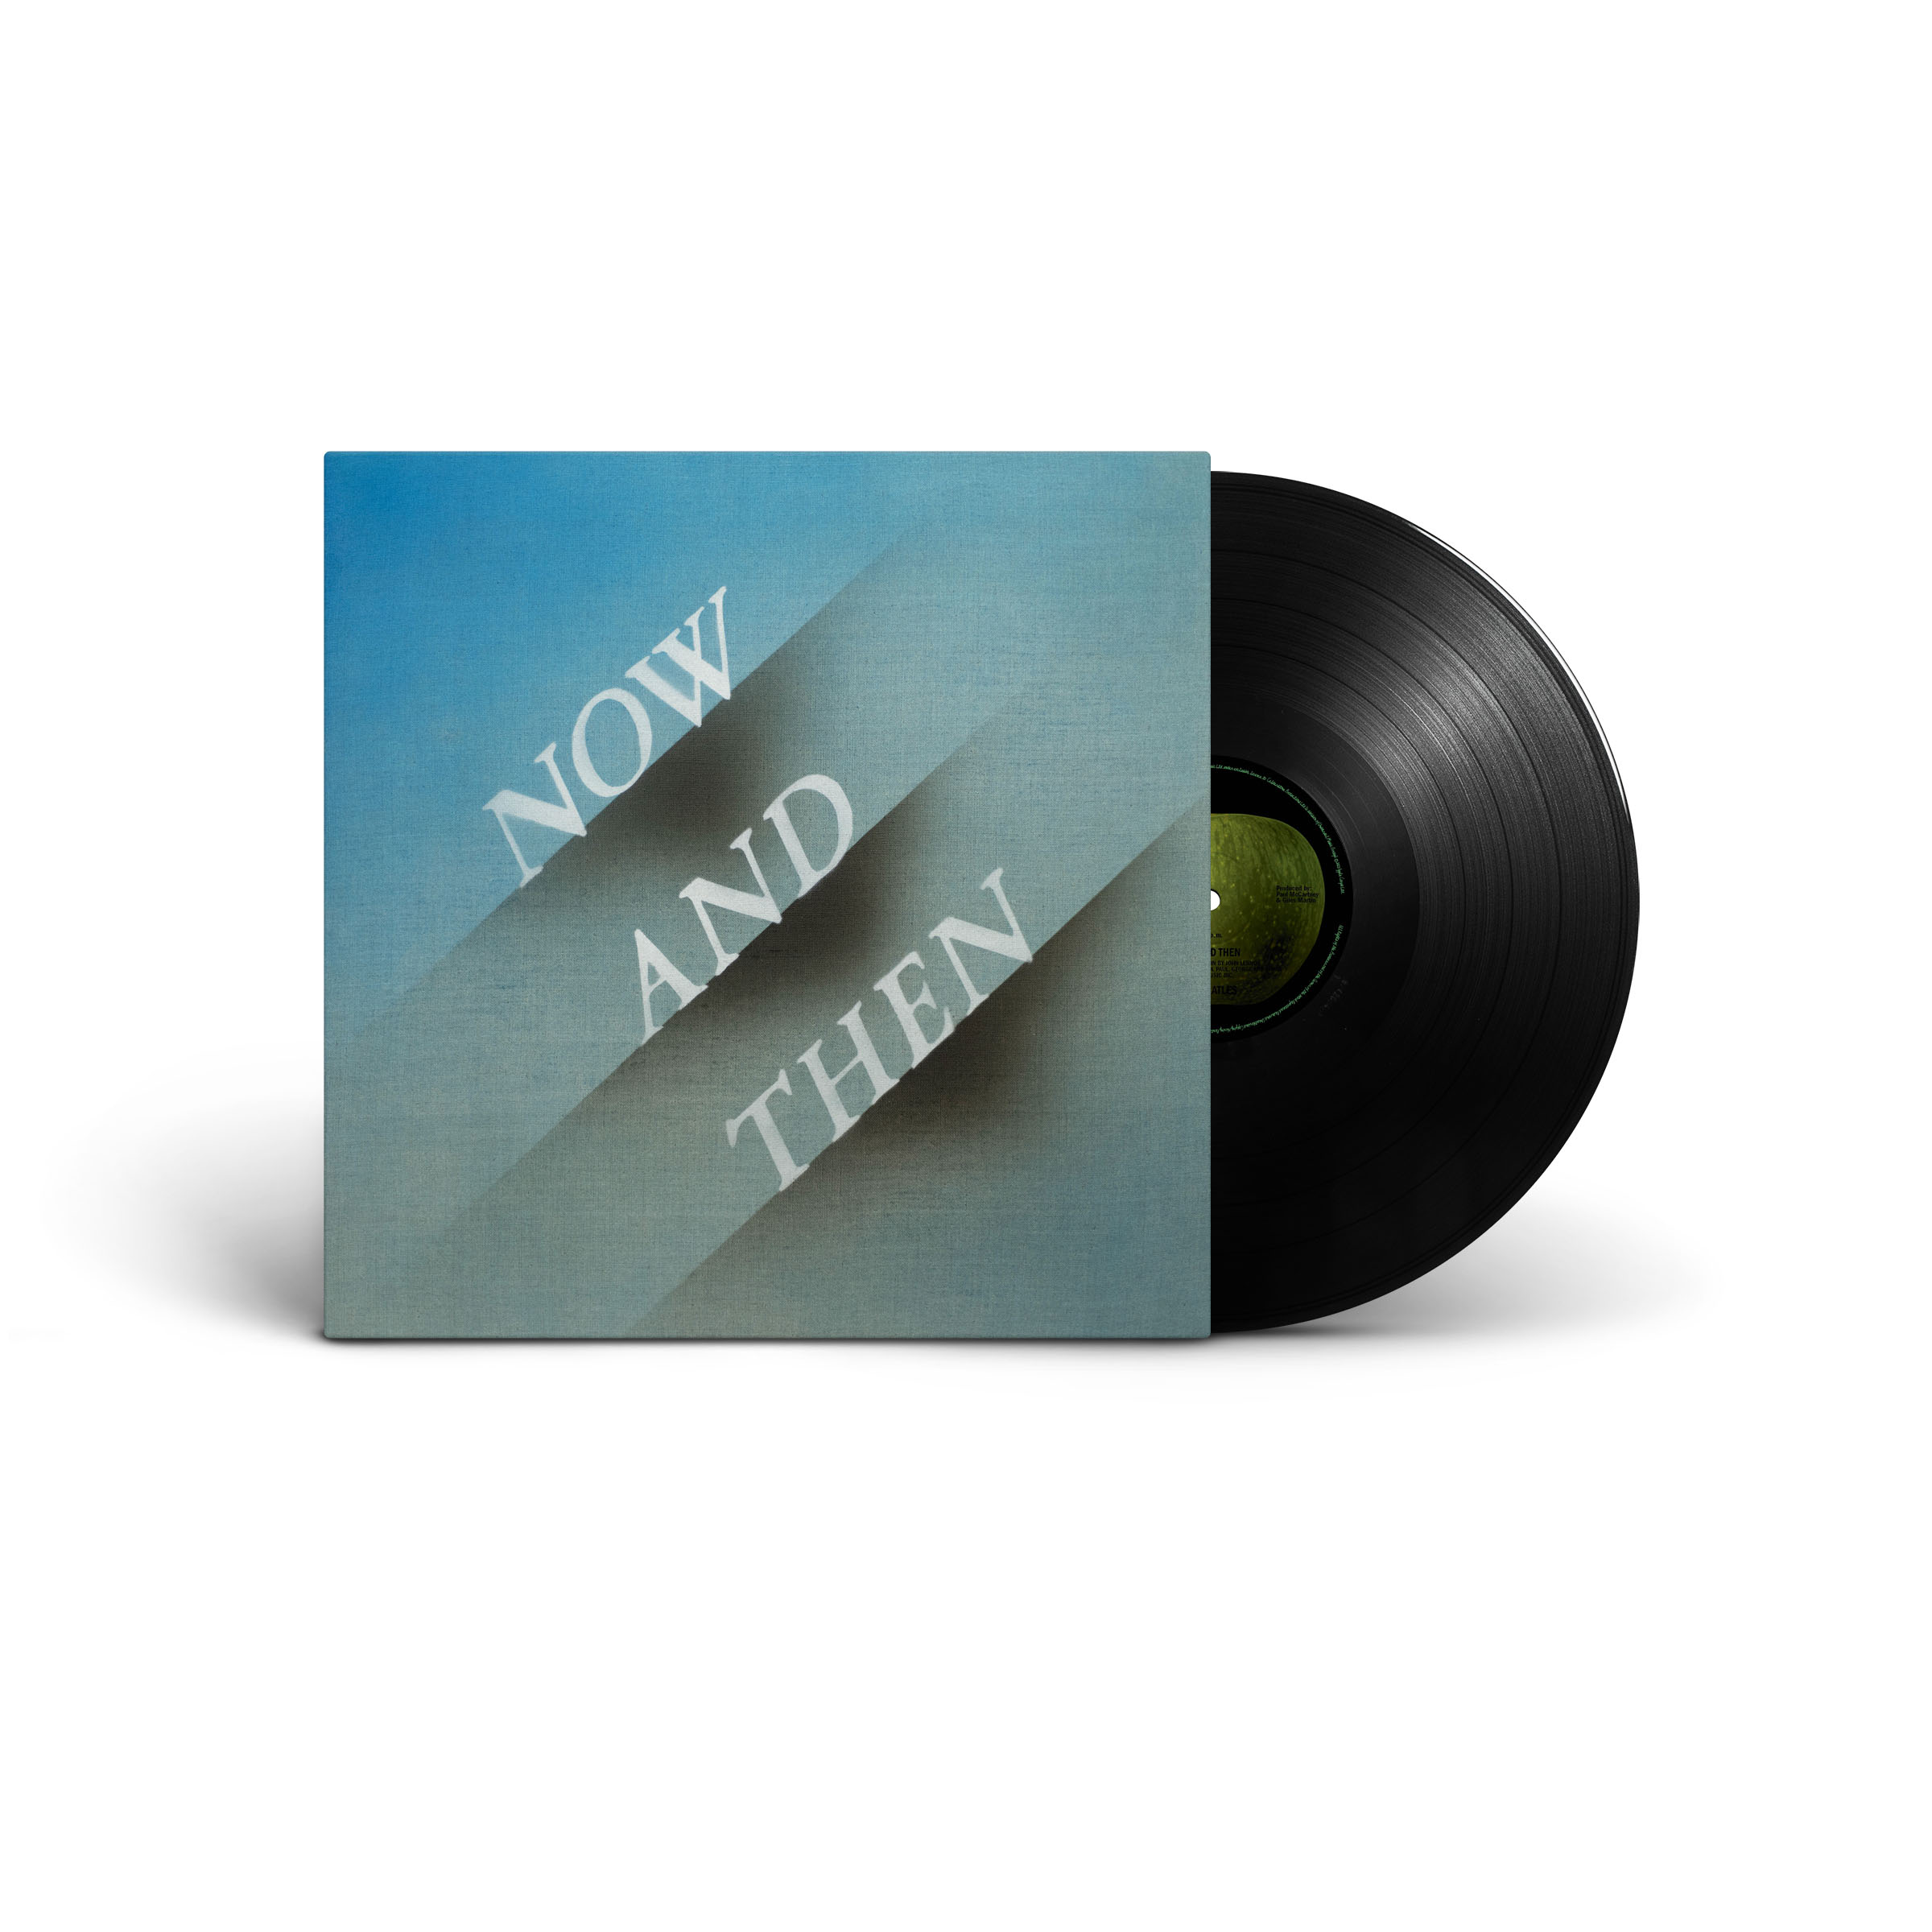 "Now And Then" 12" Single Black